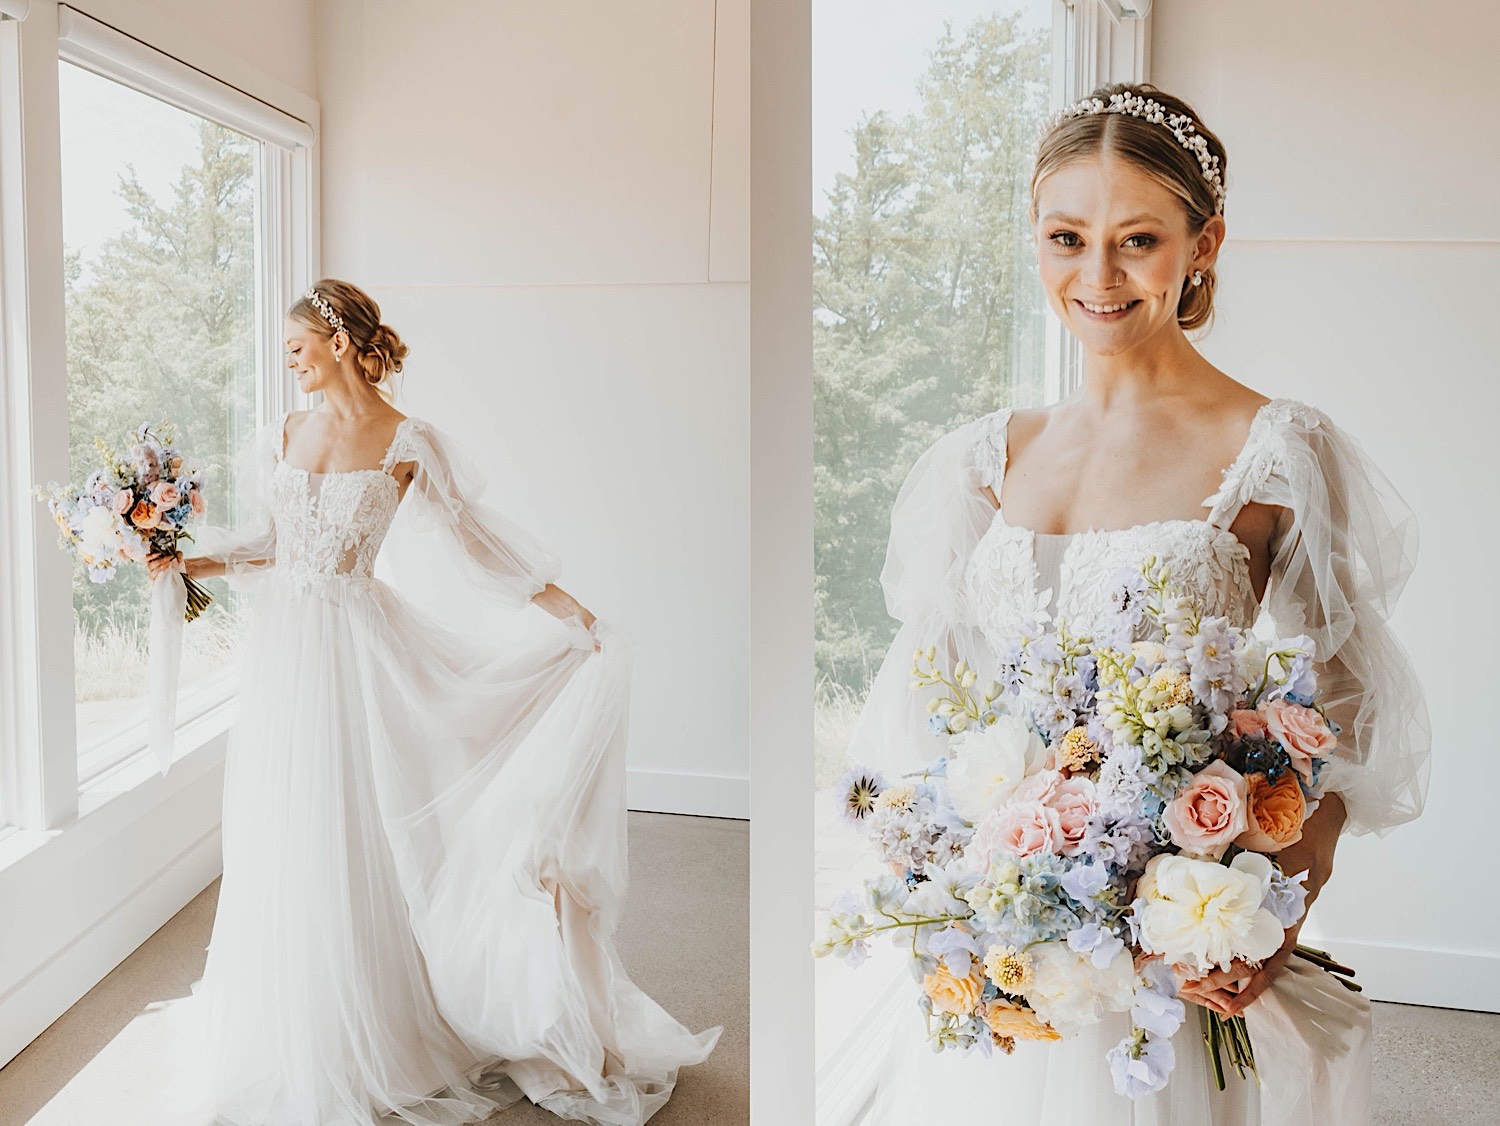 2 photos side by side, the left is of a bride in front of a window holding her bouquet and playing with her wedding dress while smiling, the right is of the bride smiling at the camera while holding her bouquet